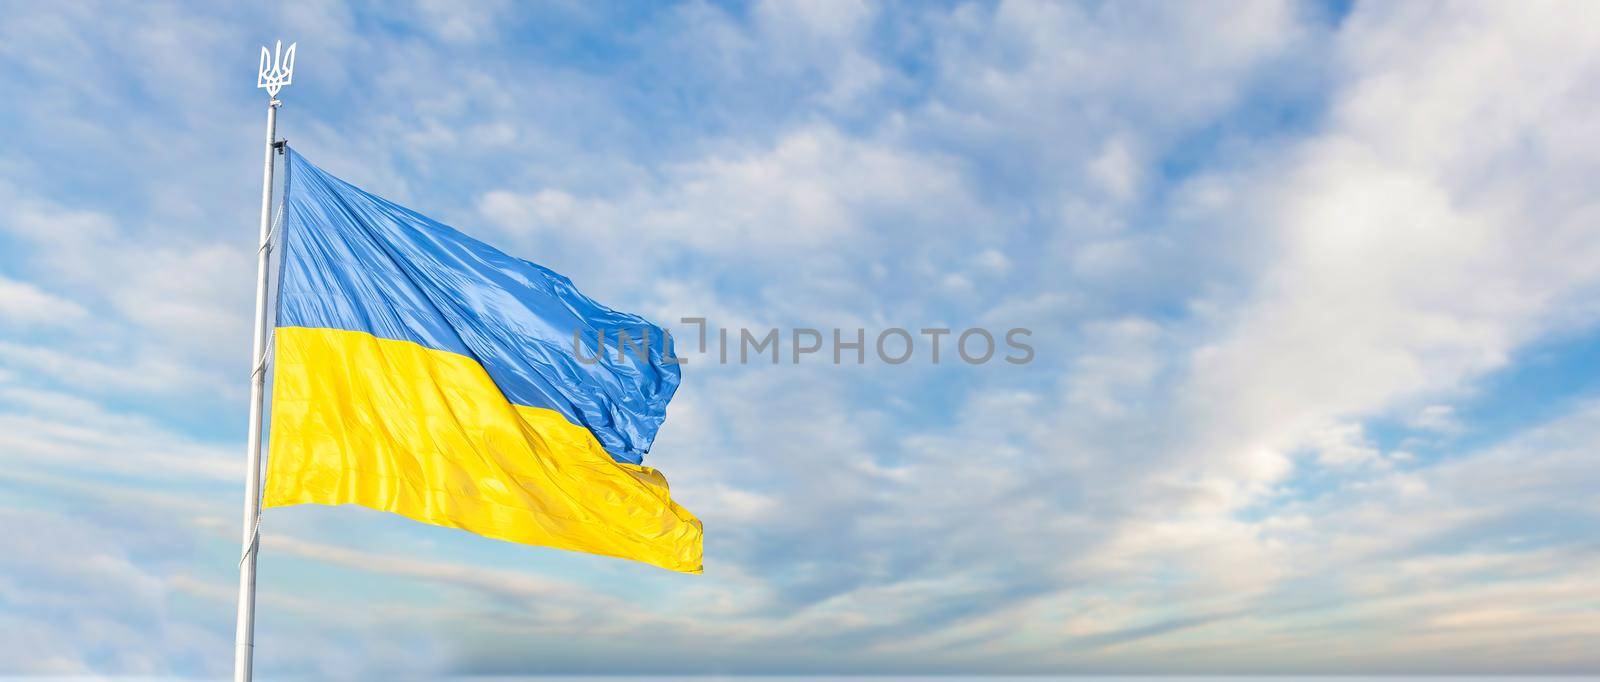 Large national flag of Ukraine flies in the blue sky. Big yellow blue Ukrainian state banner. Independence, flag, Constitution Day, National Holiday, text space. by Andelov13